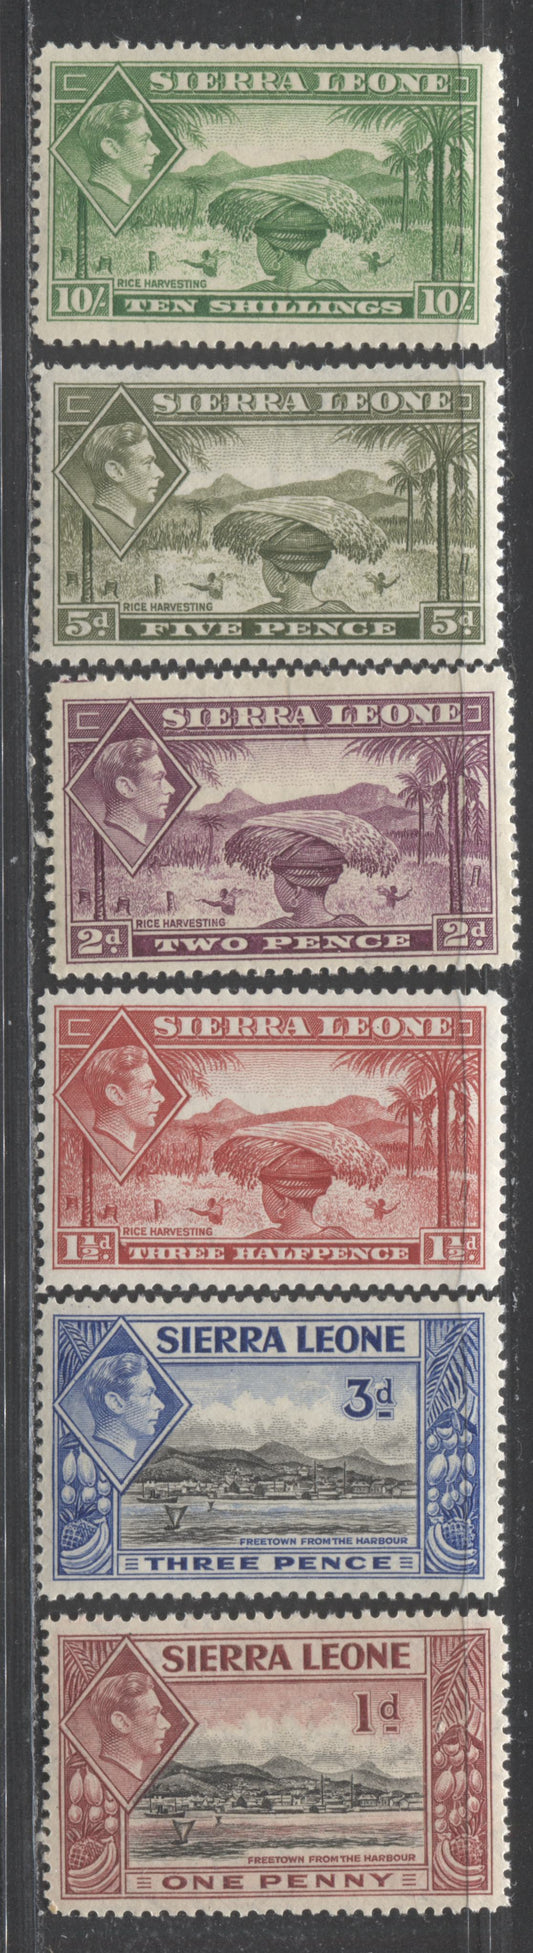 Sierra Leone SC#174/184 1938-1944 KGVI Pictorial Issue, 6 F/VFOG Singles, Click on Listing to See ALL Pictures, Estimated Value $30 USD